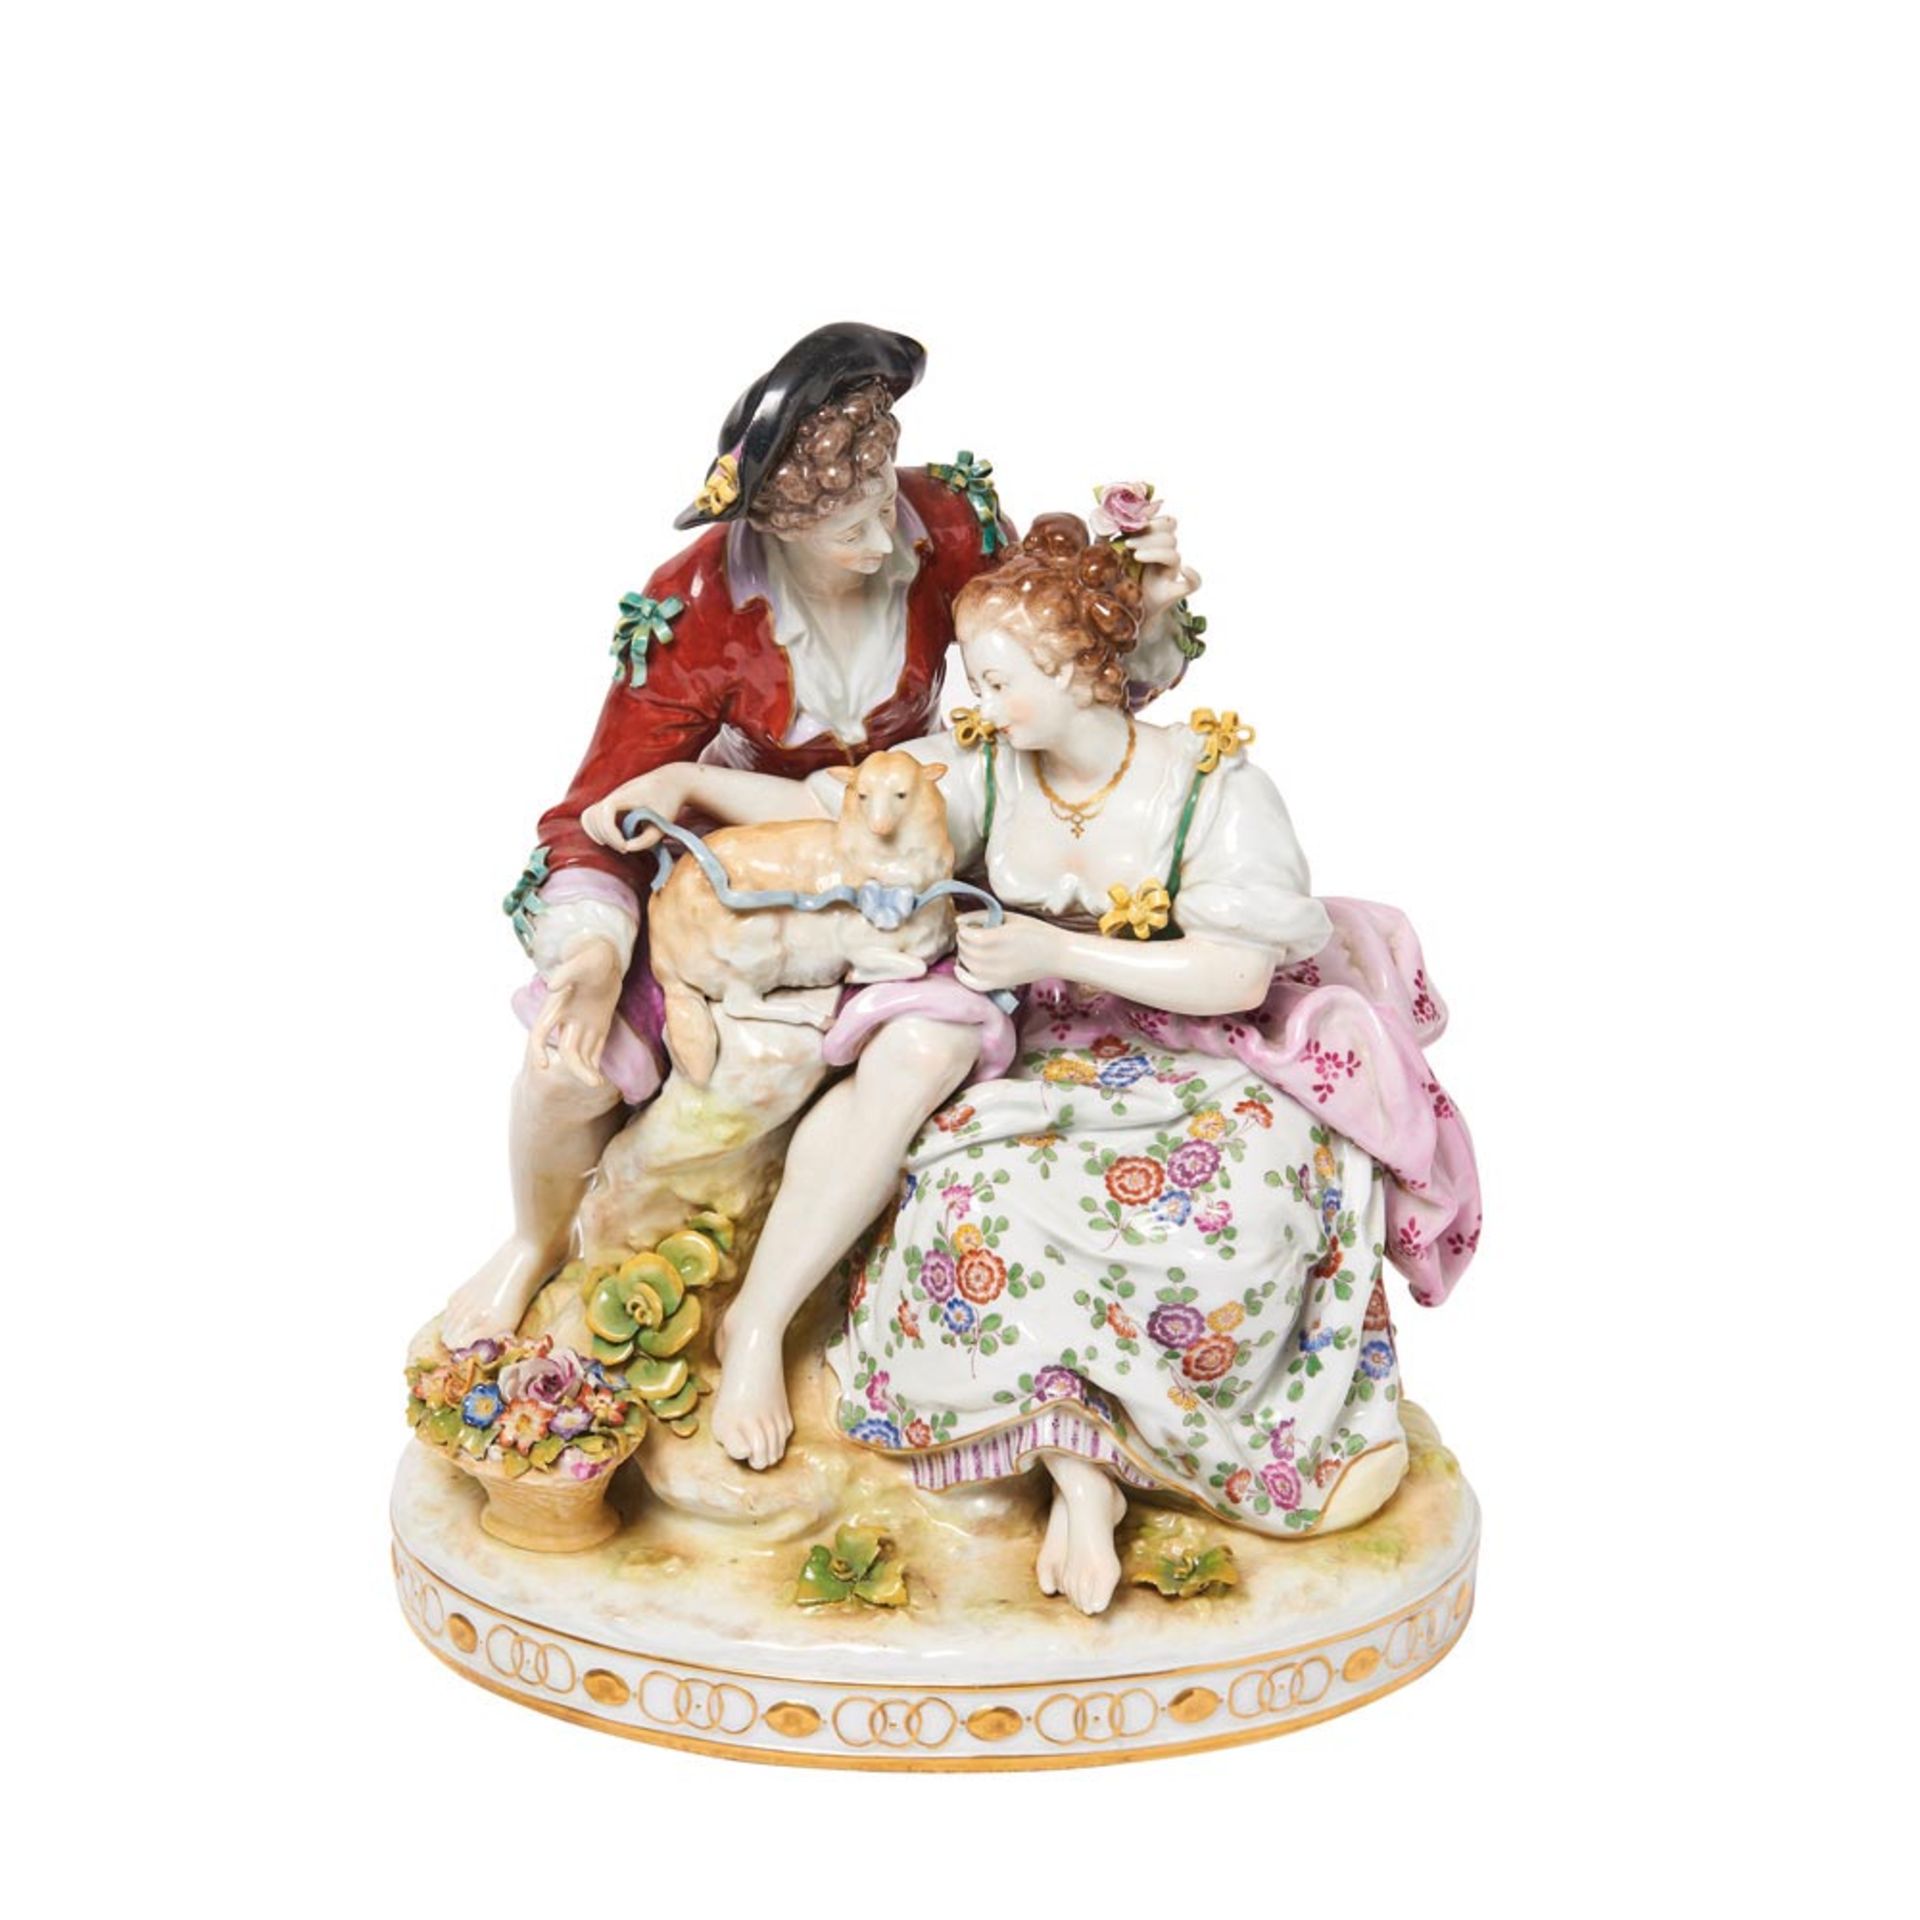 German Rudolstadt Volksted porcelain group, late 19th century